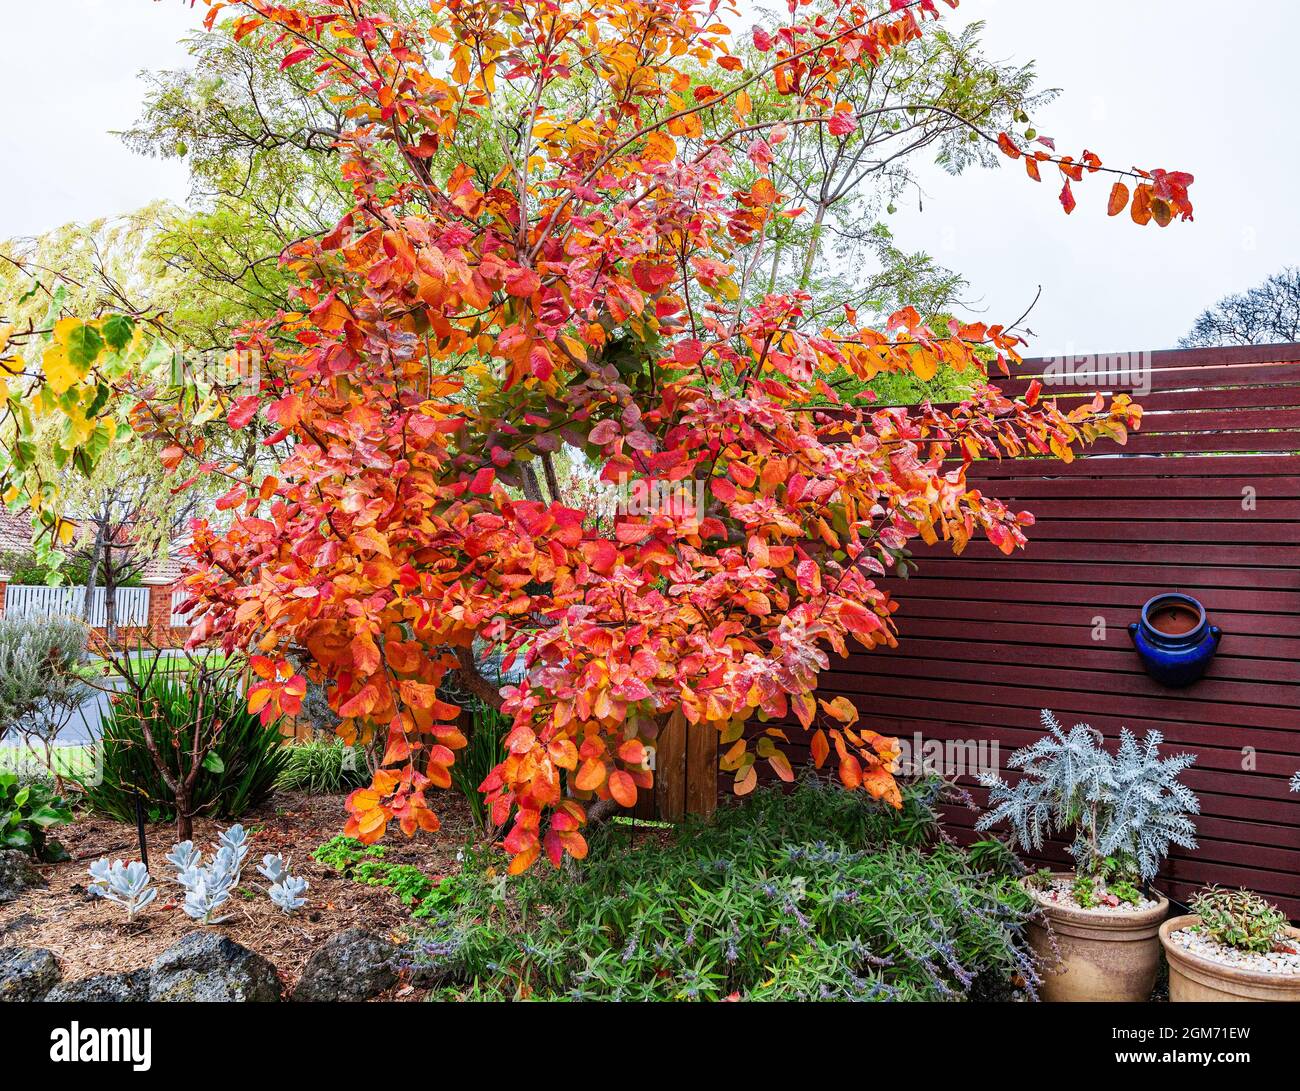 Smokebush grace, Cotinus Coggygria with it's colourful autumnal foliage is a feature in this Melbourne suburban garden. Stock Photo